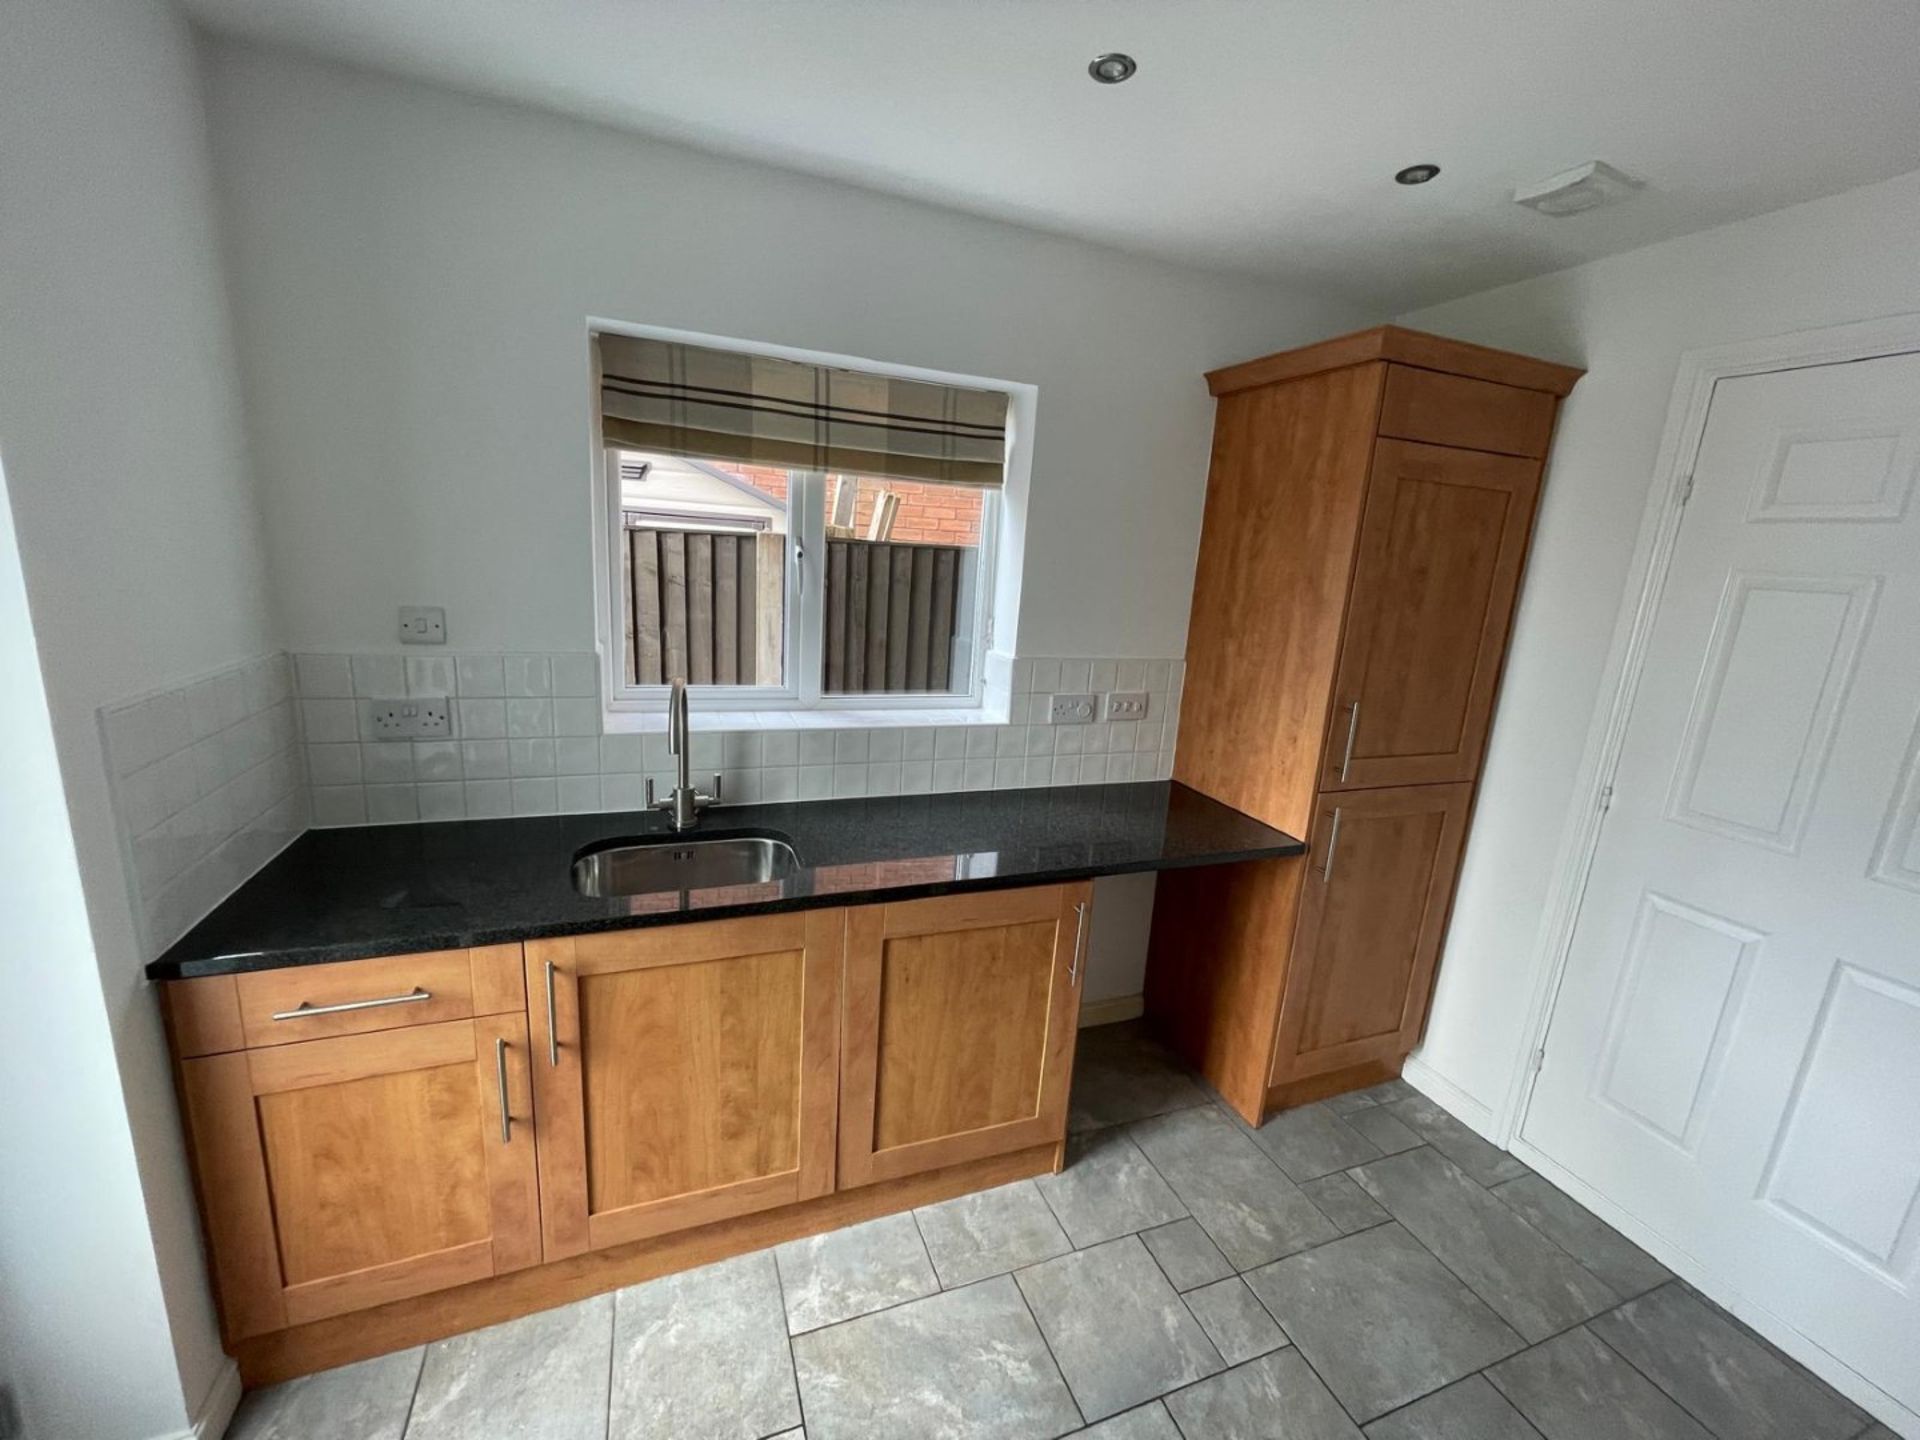 1 x Shaker-style, Feature-rich Fitted Kitchen with Solid Wood Doors, Granite Worktops and Appliances - Image 30 of 111